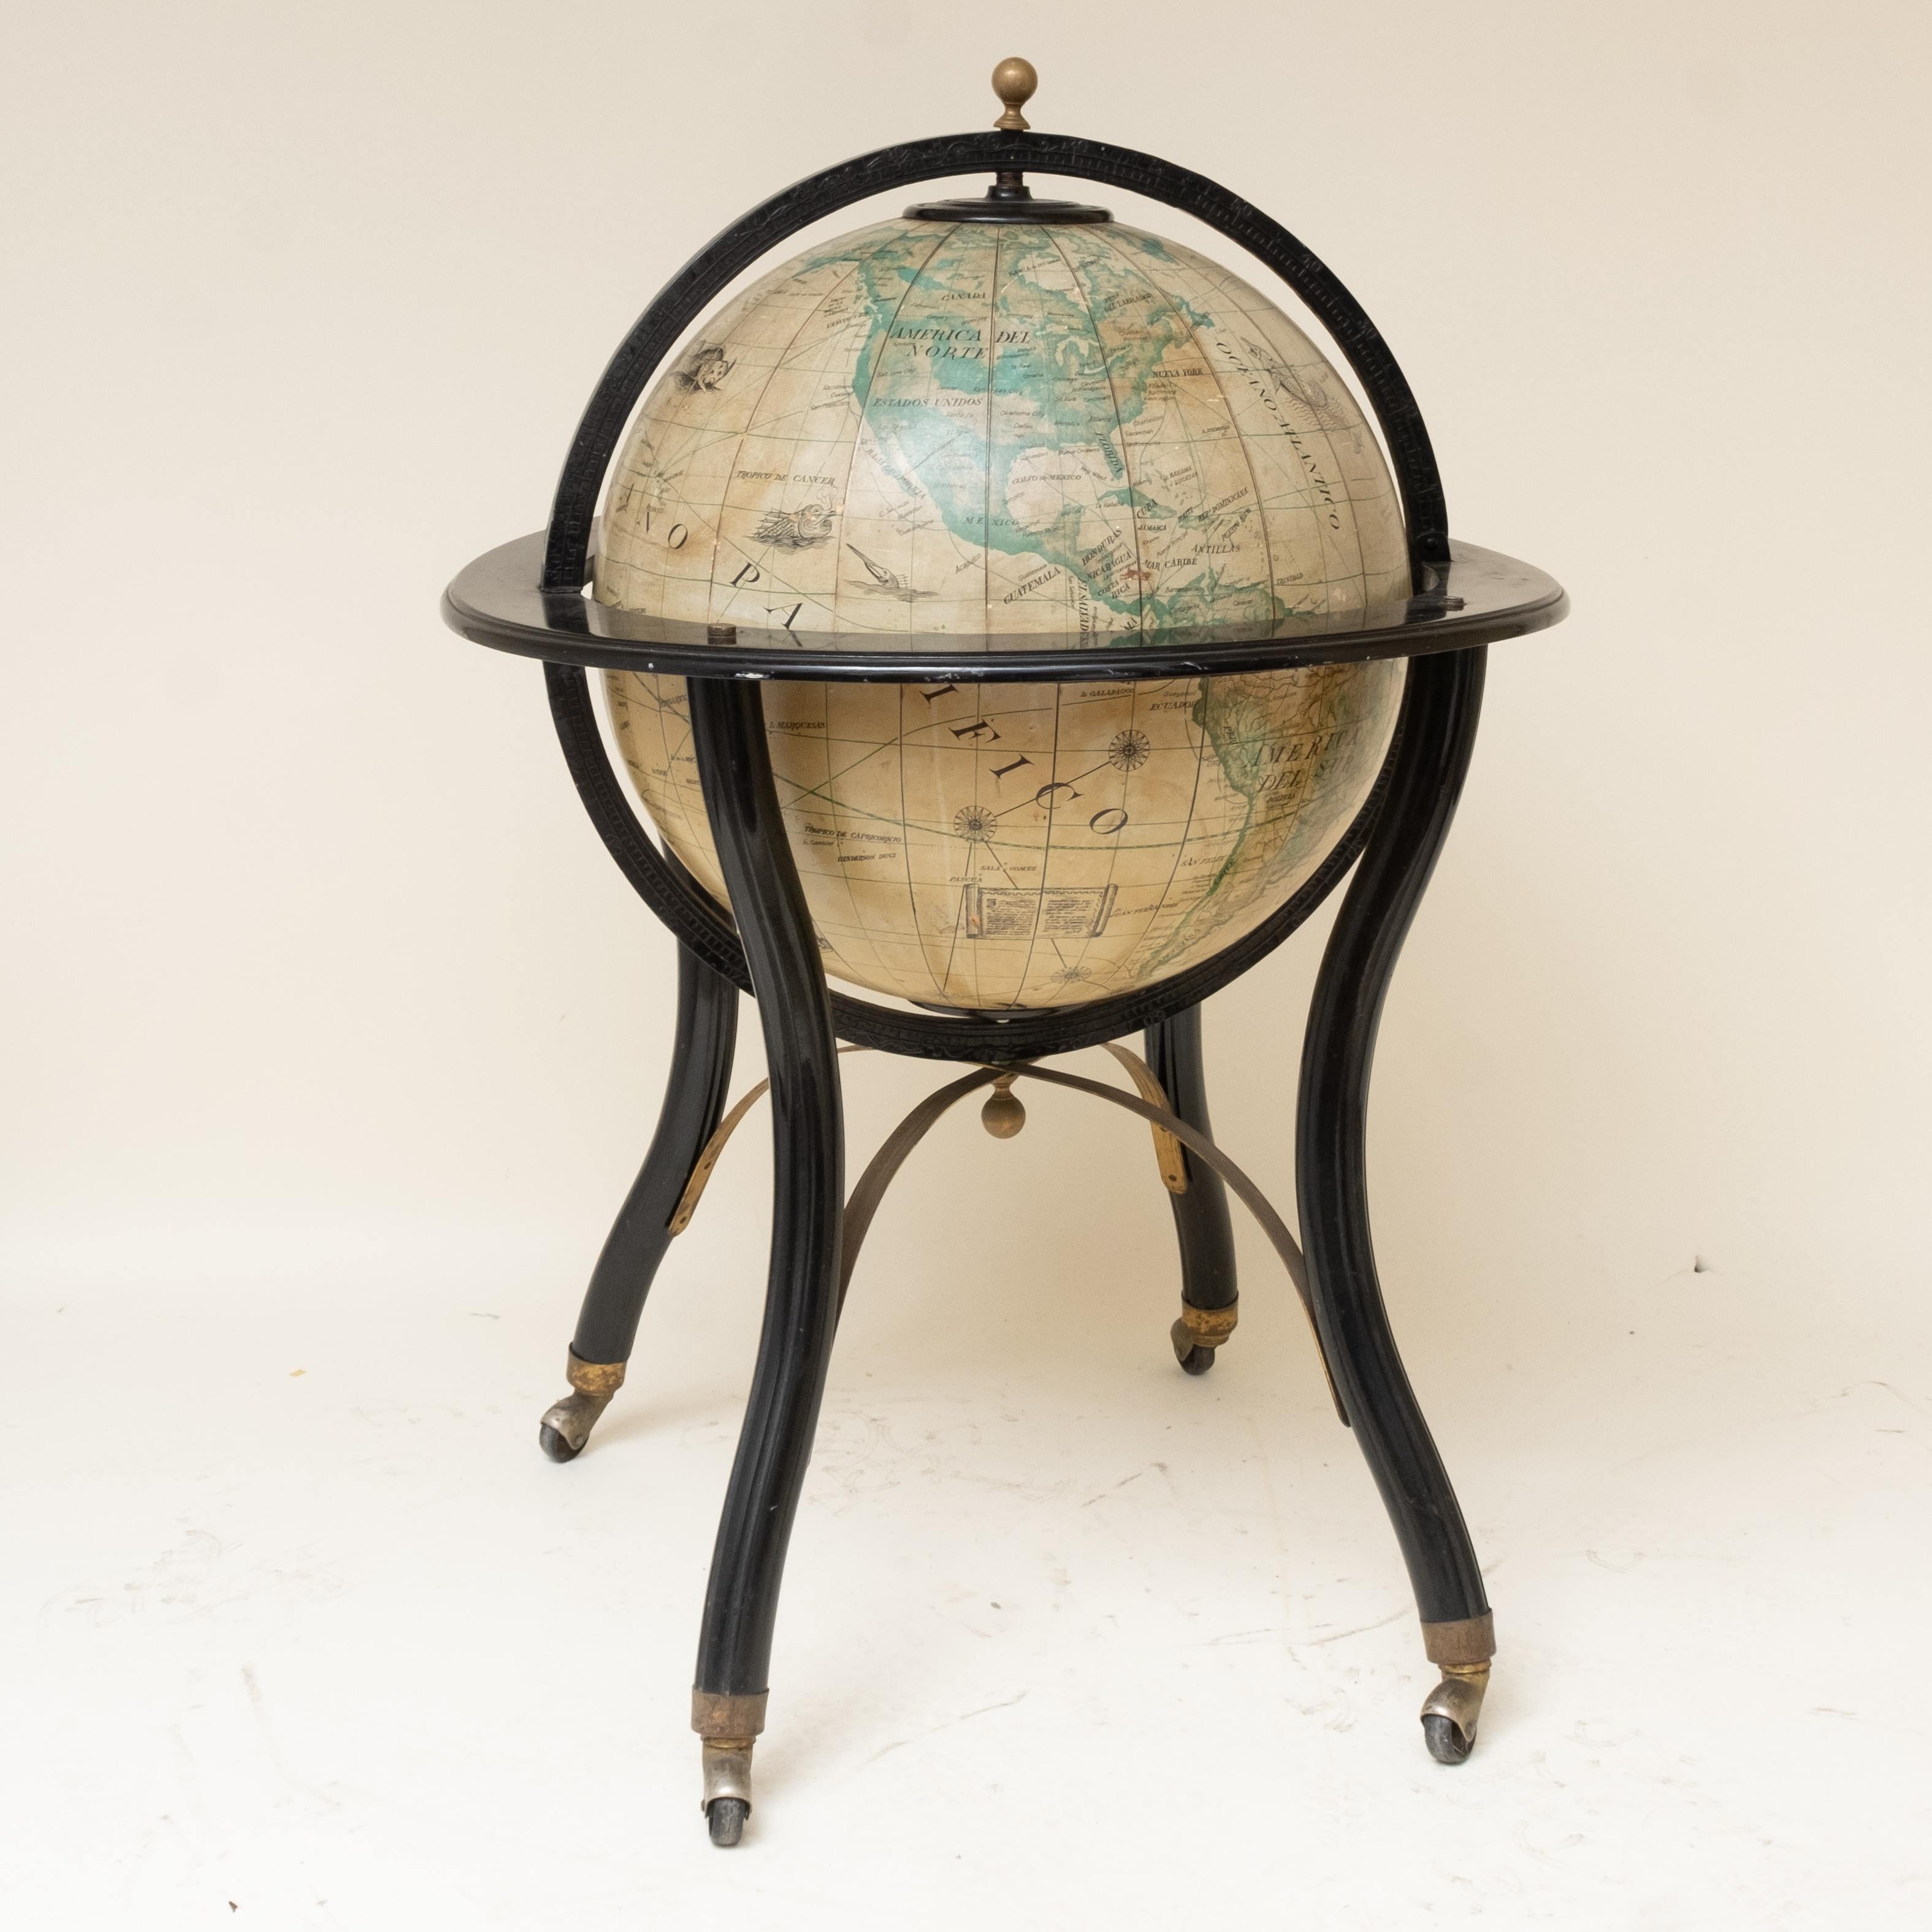 Old Spanish Globe. Maker Identified but illegibly - see picture. The globe is mounted in a ebonized wood, brass and steel framework